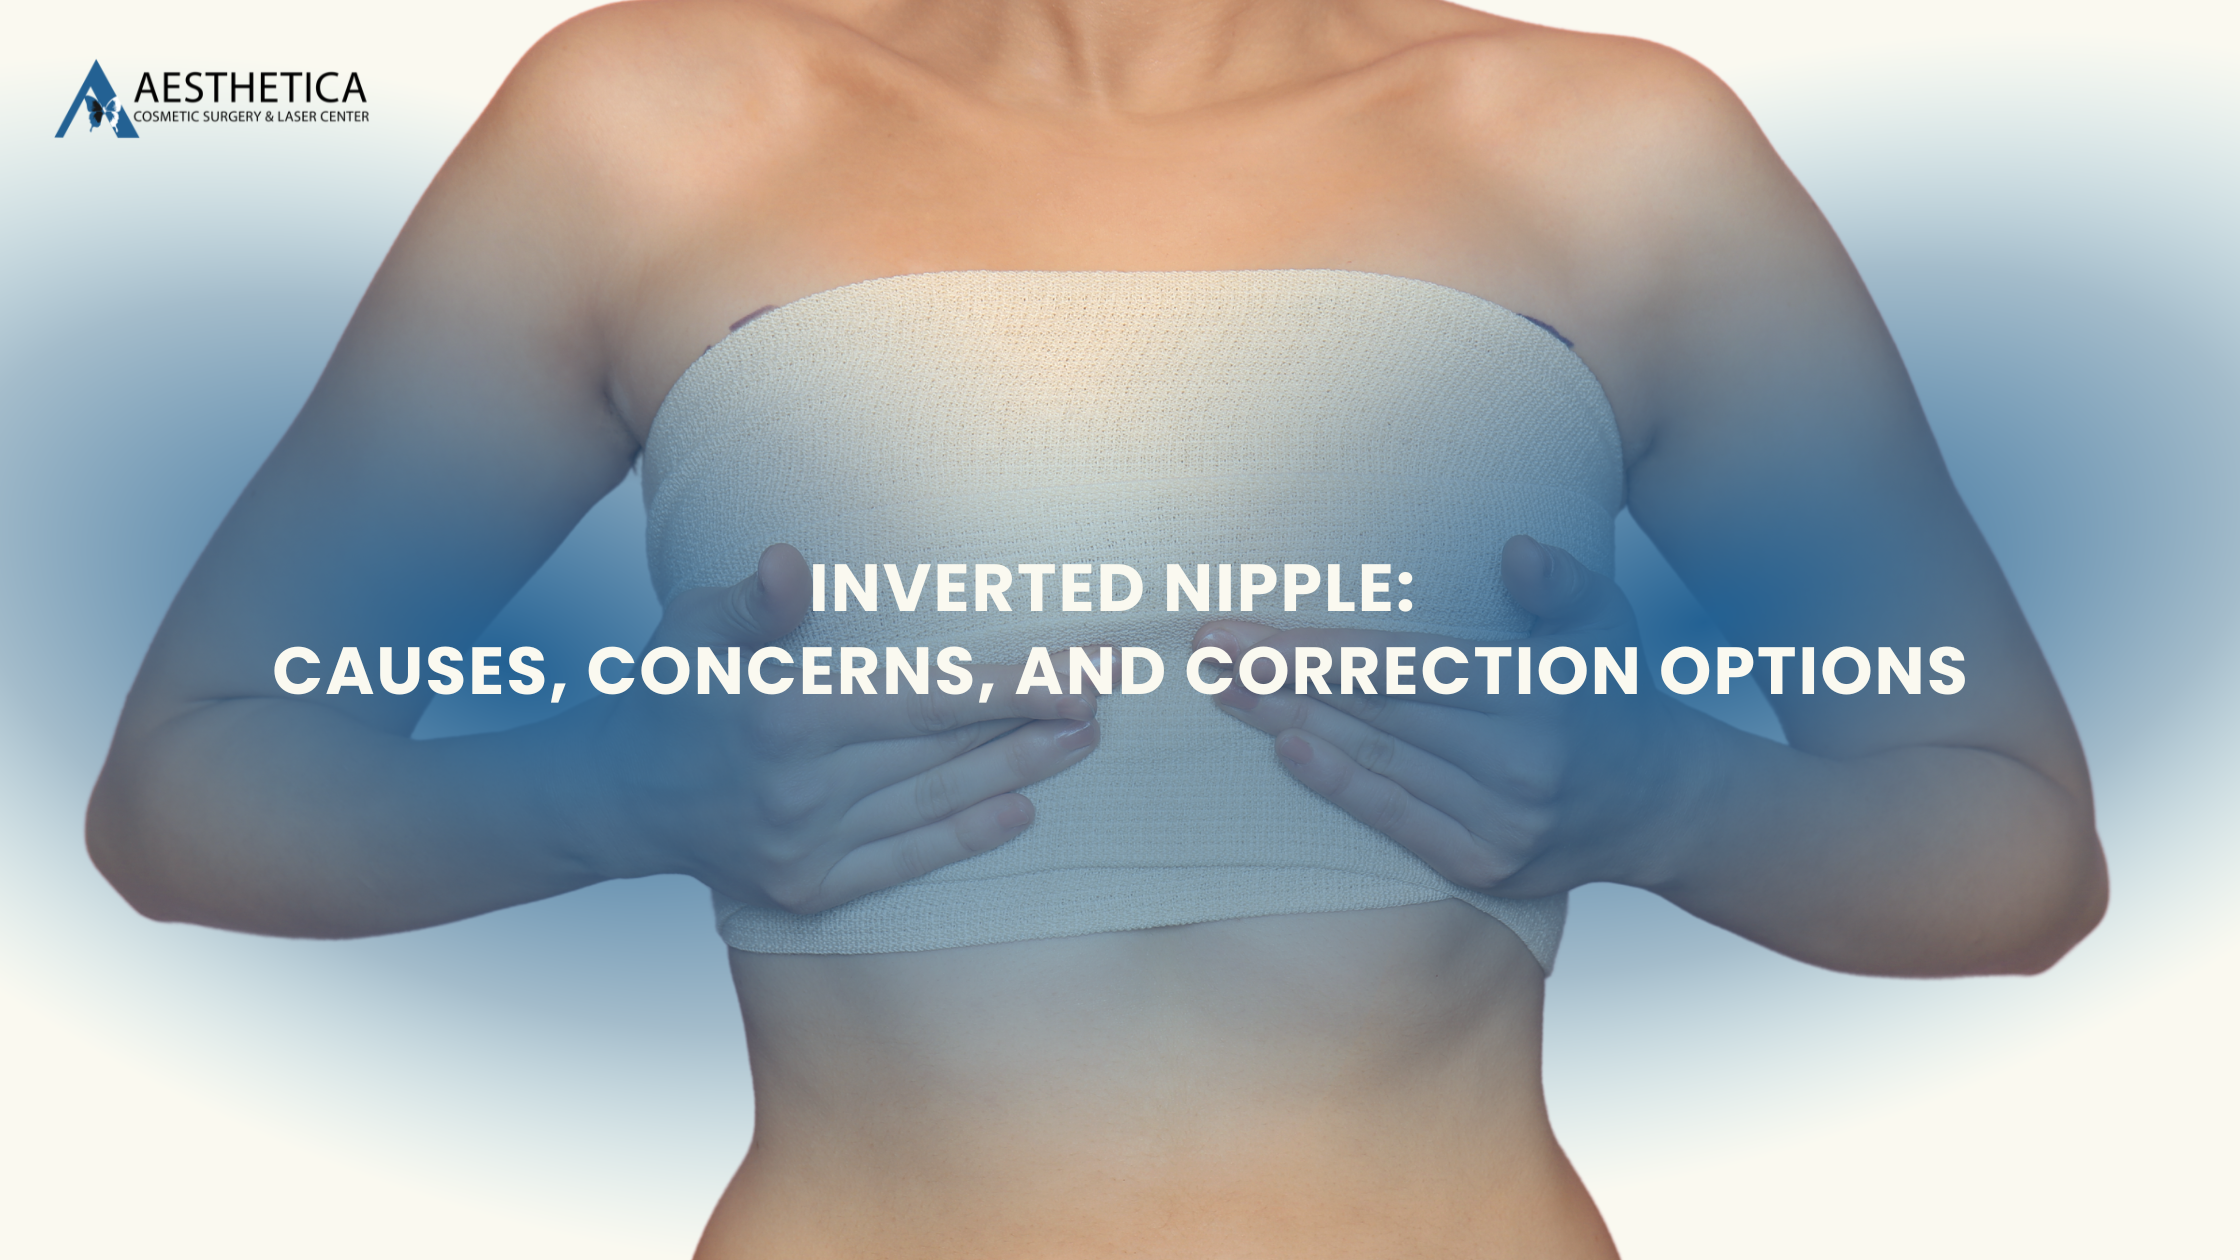 Inverted Nipple: Causes, Concerns, and Correction Options